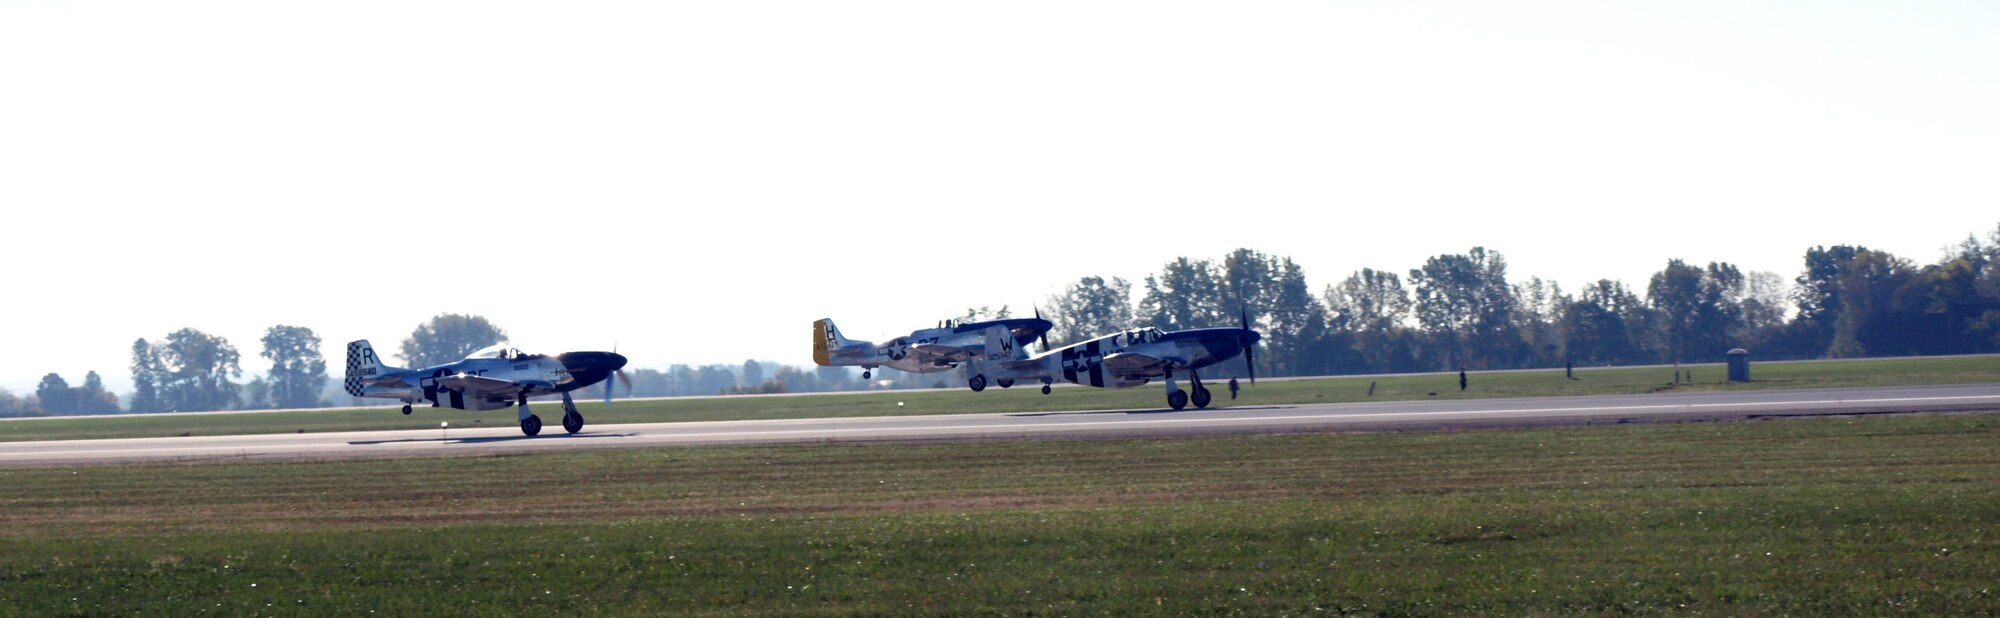 Three P-51 Mustangs take to the air at Rickenbacker International Airport Sept. 29. (Air Force photo by Ron Scharven)